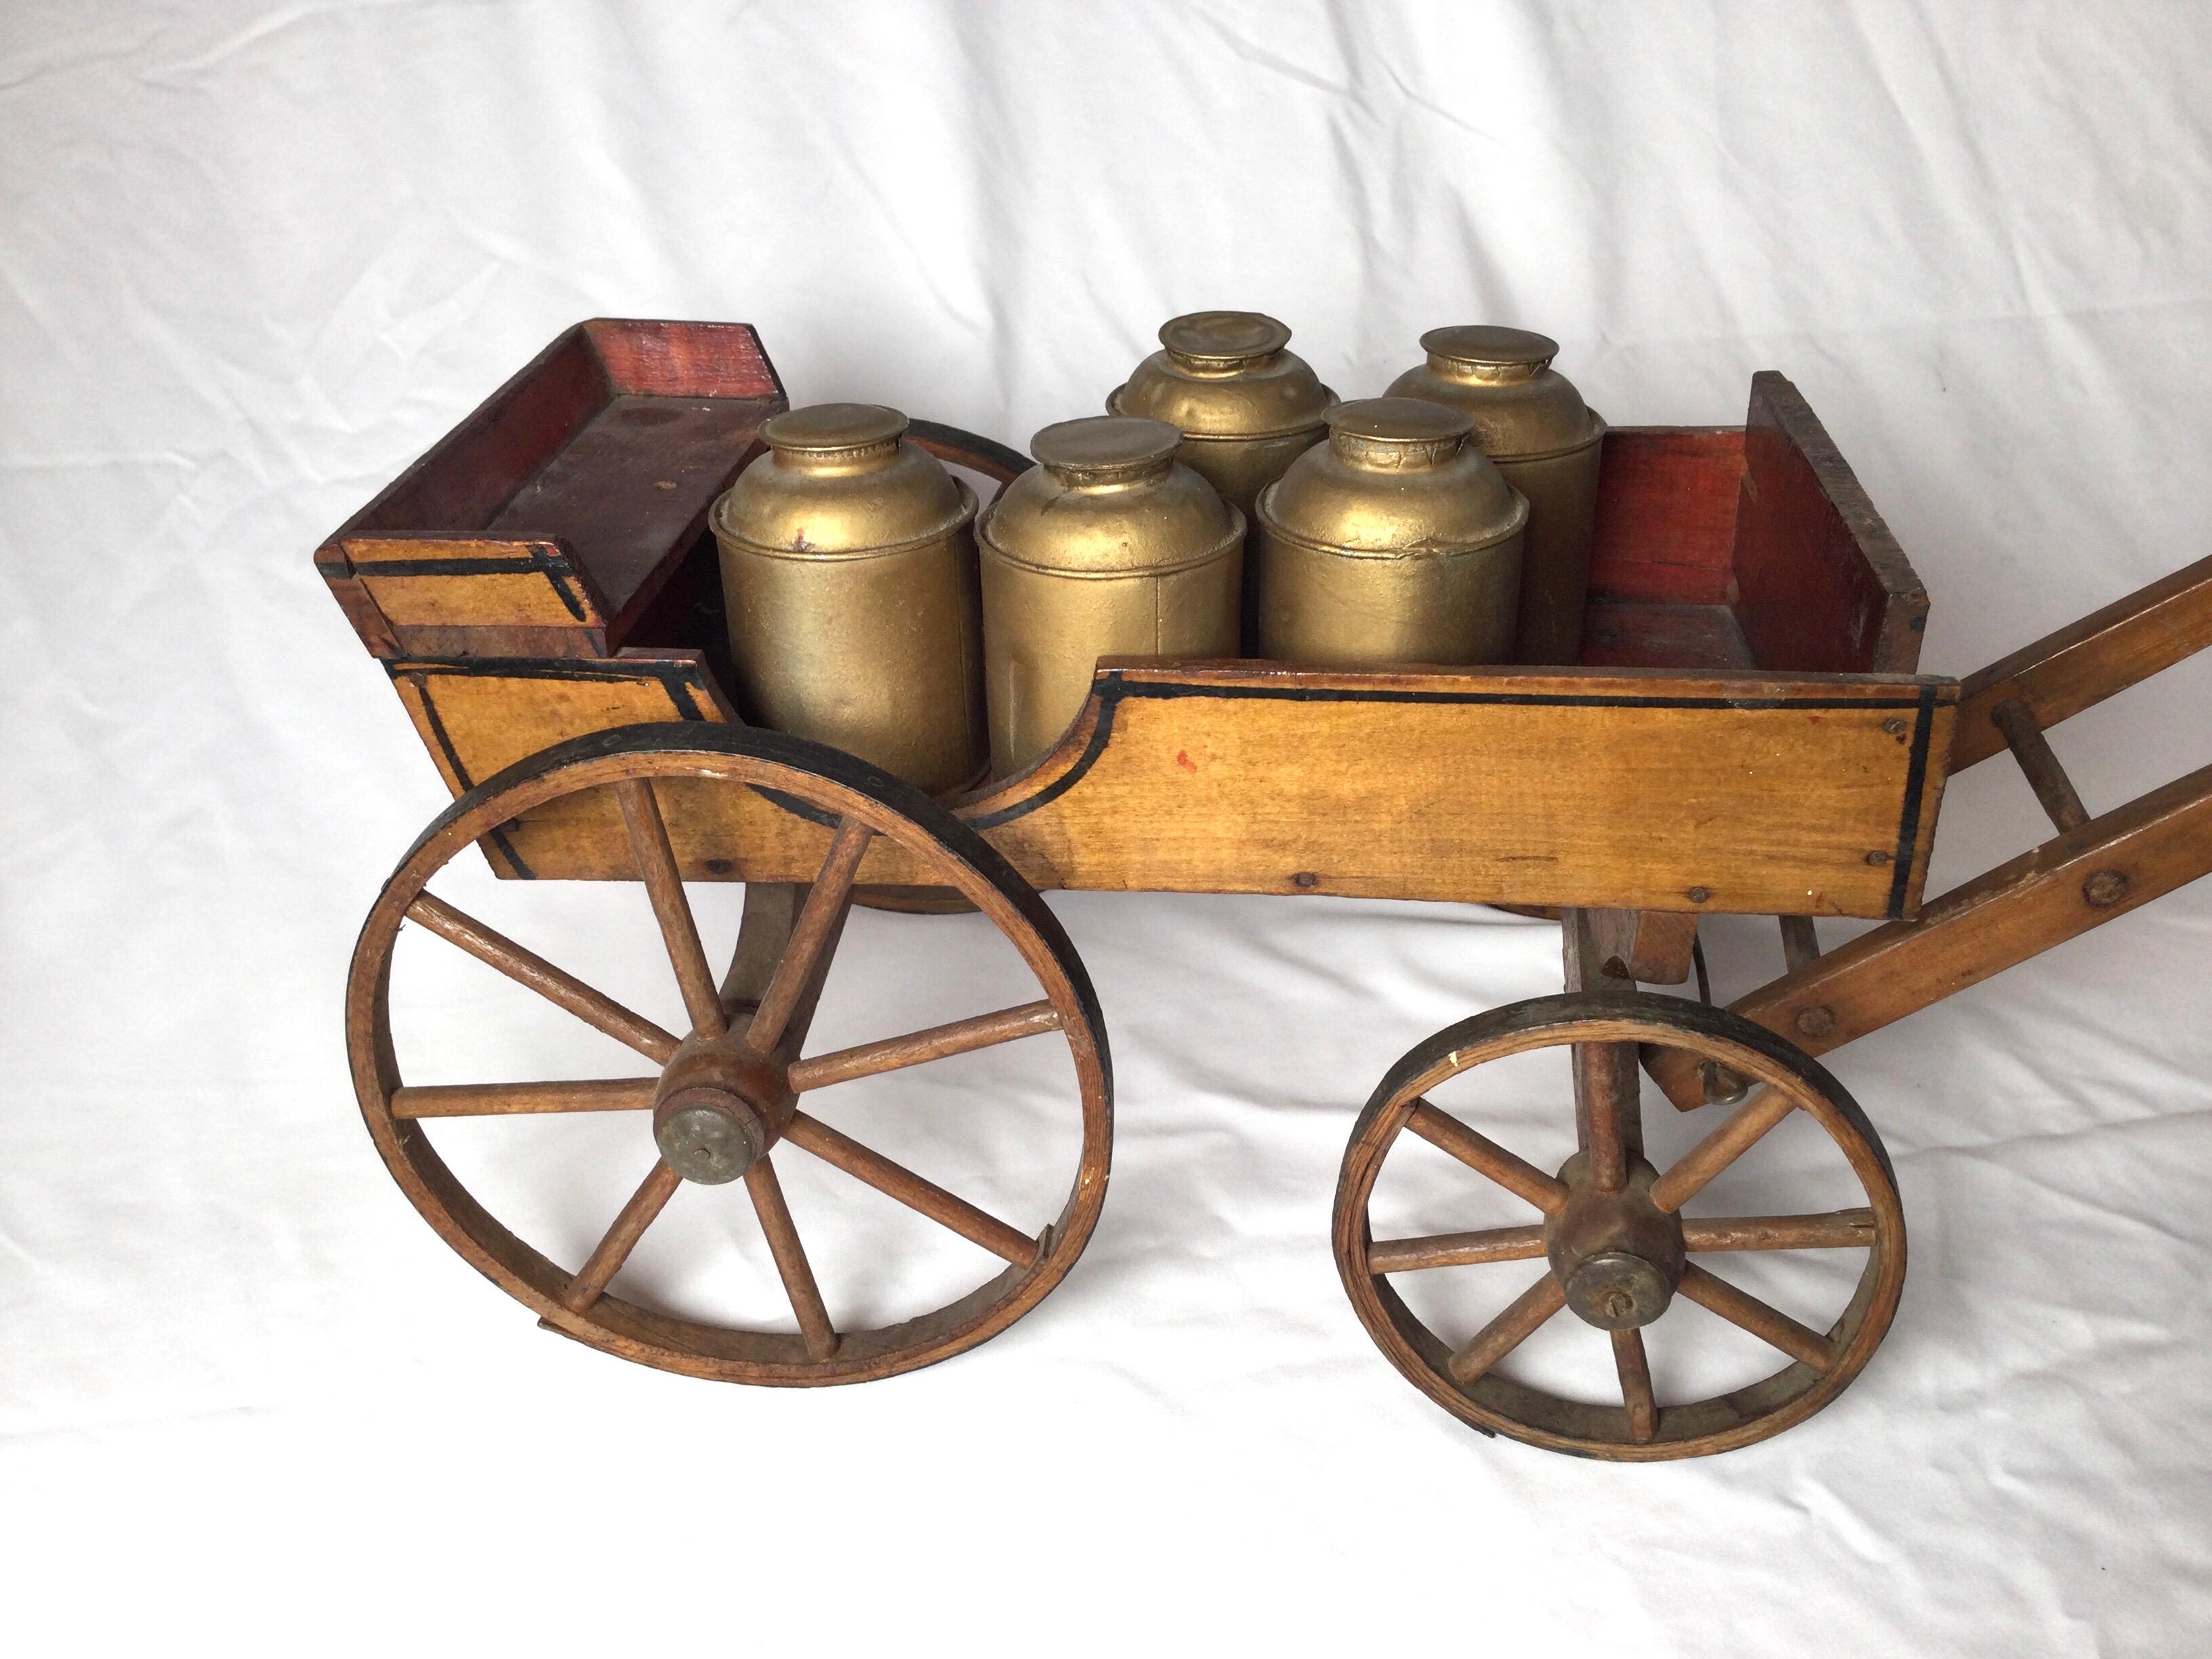 Antique toy mohair horse with primitive milk wagon. Wagon has metal cans and original wood wheels. Wheels on front are 4.5